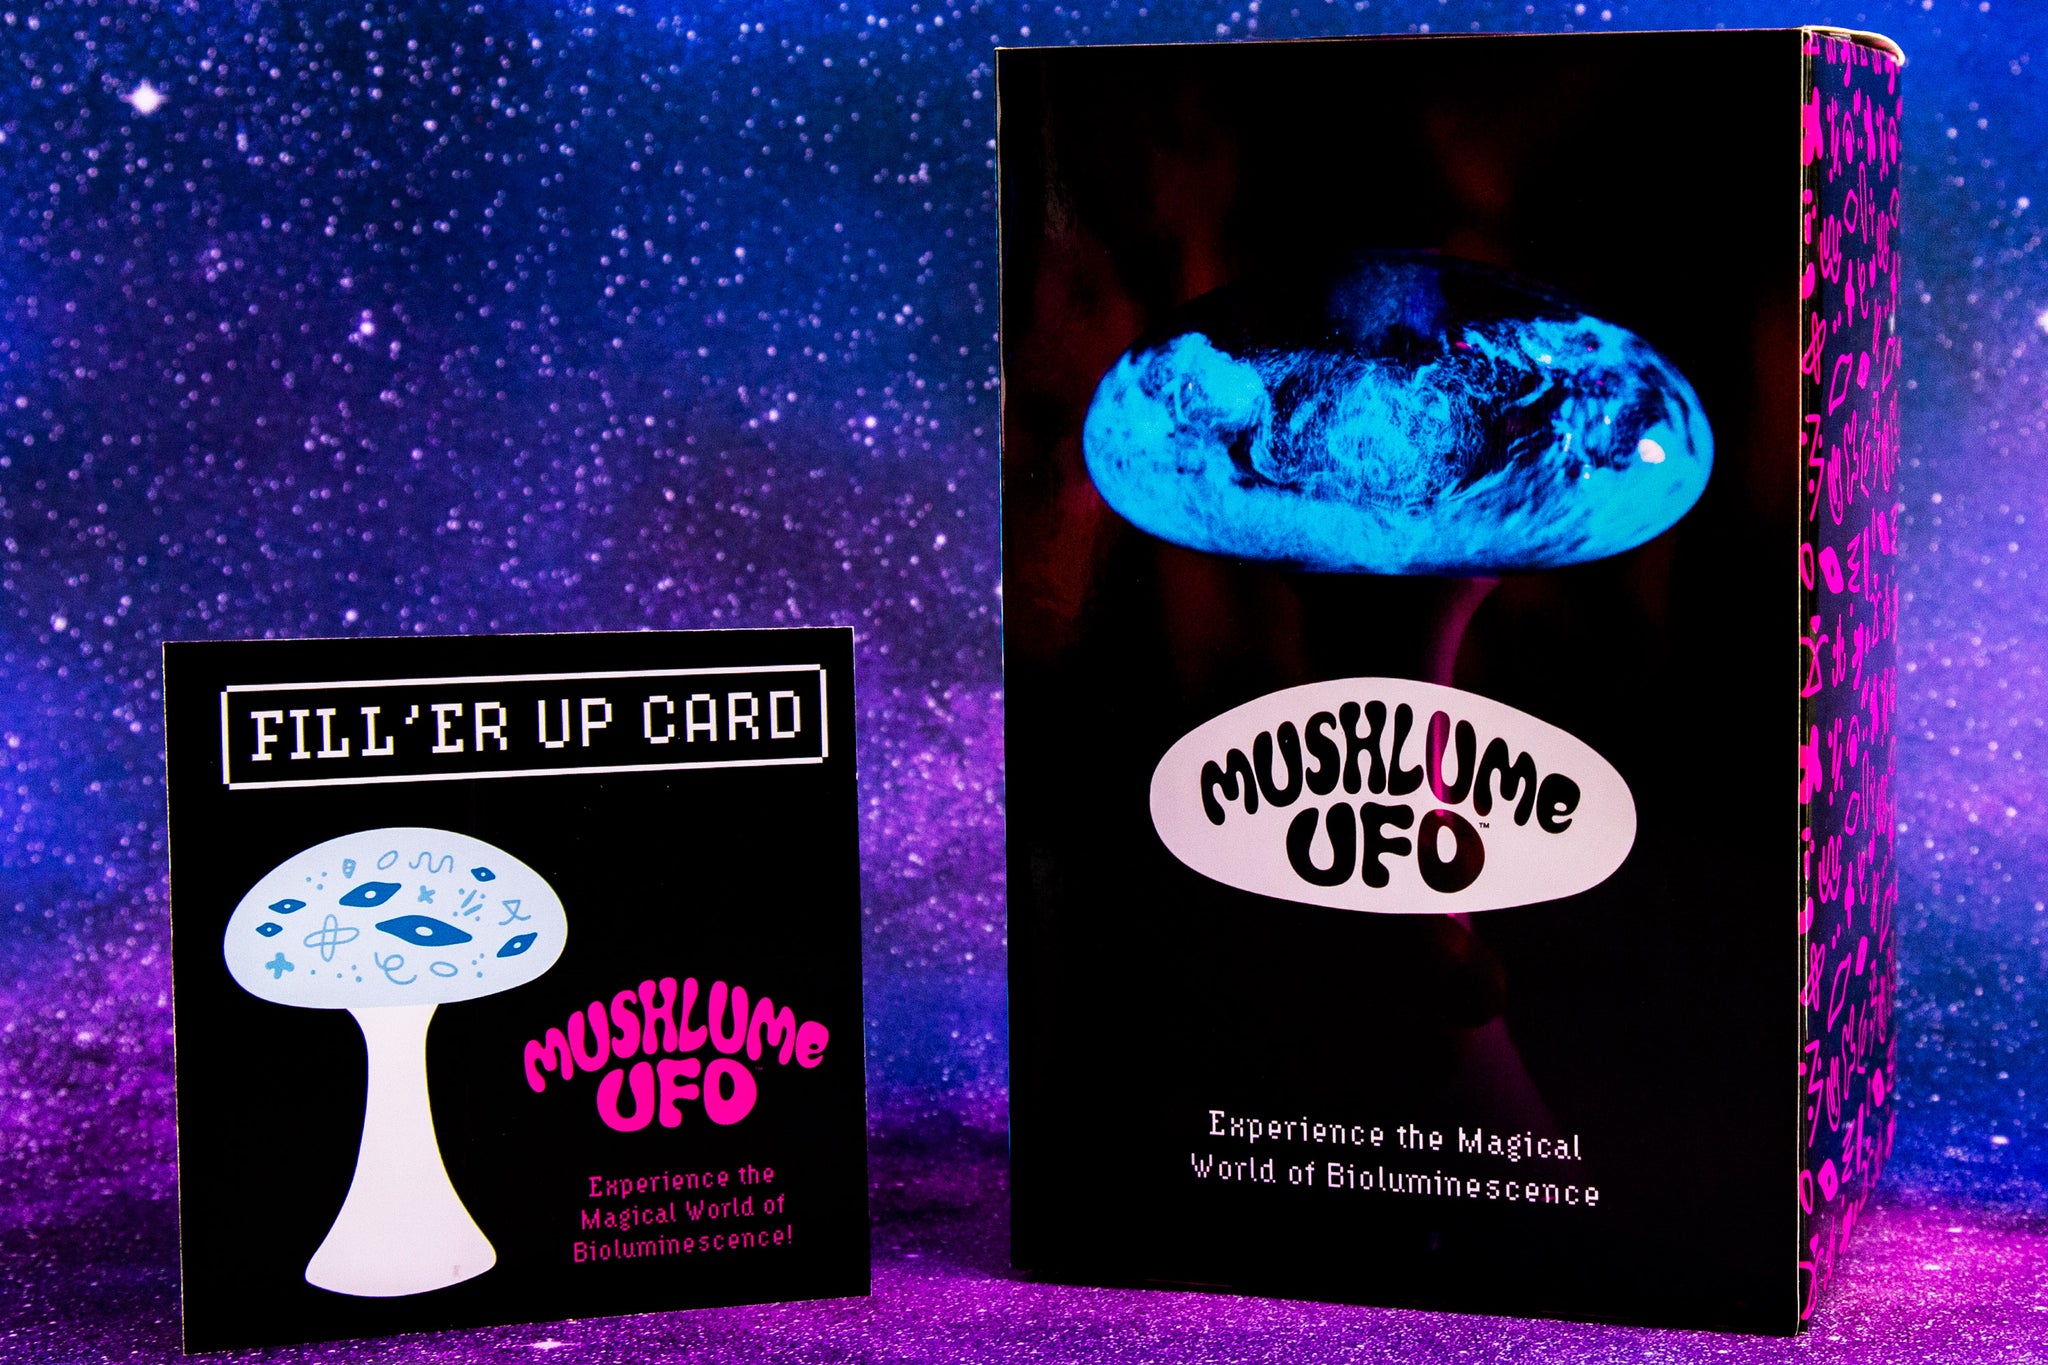 Mushlume UFO Gift Option with Fill'er Up Kit to redeem for bioluminescent algae and VitaminSea at a later date at no additional charge.